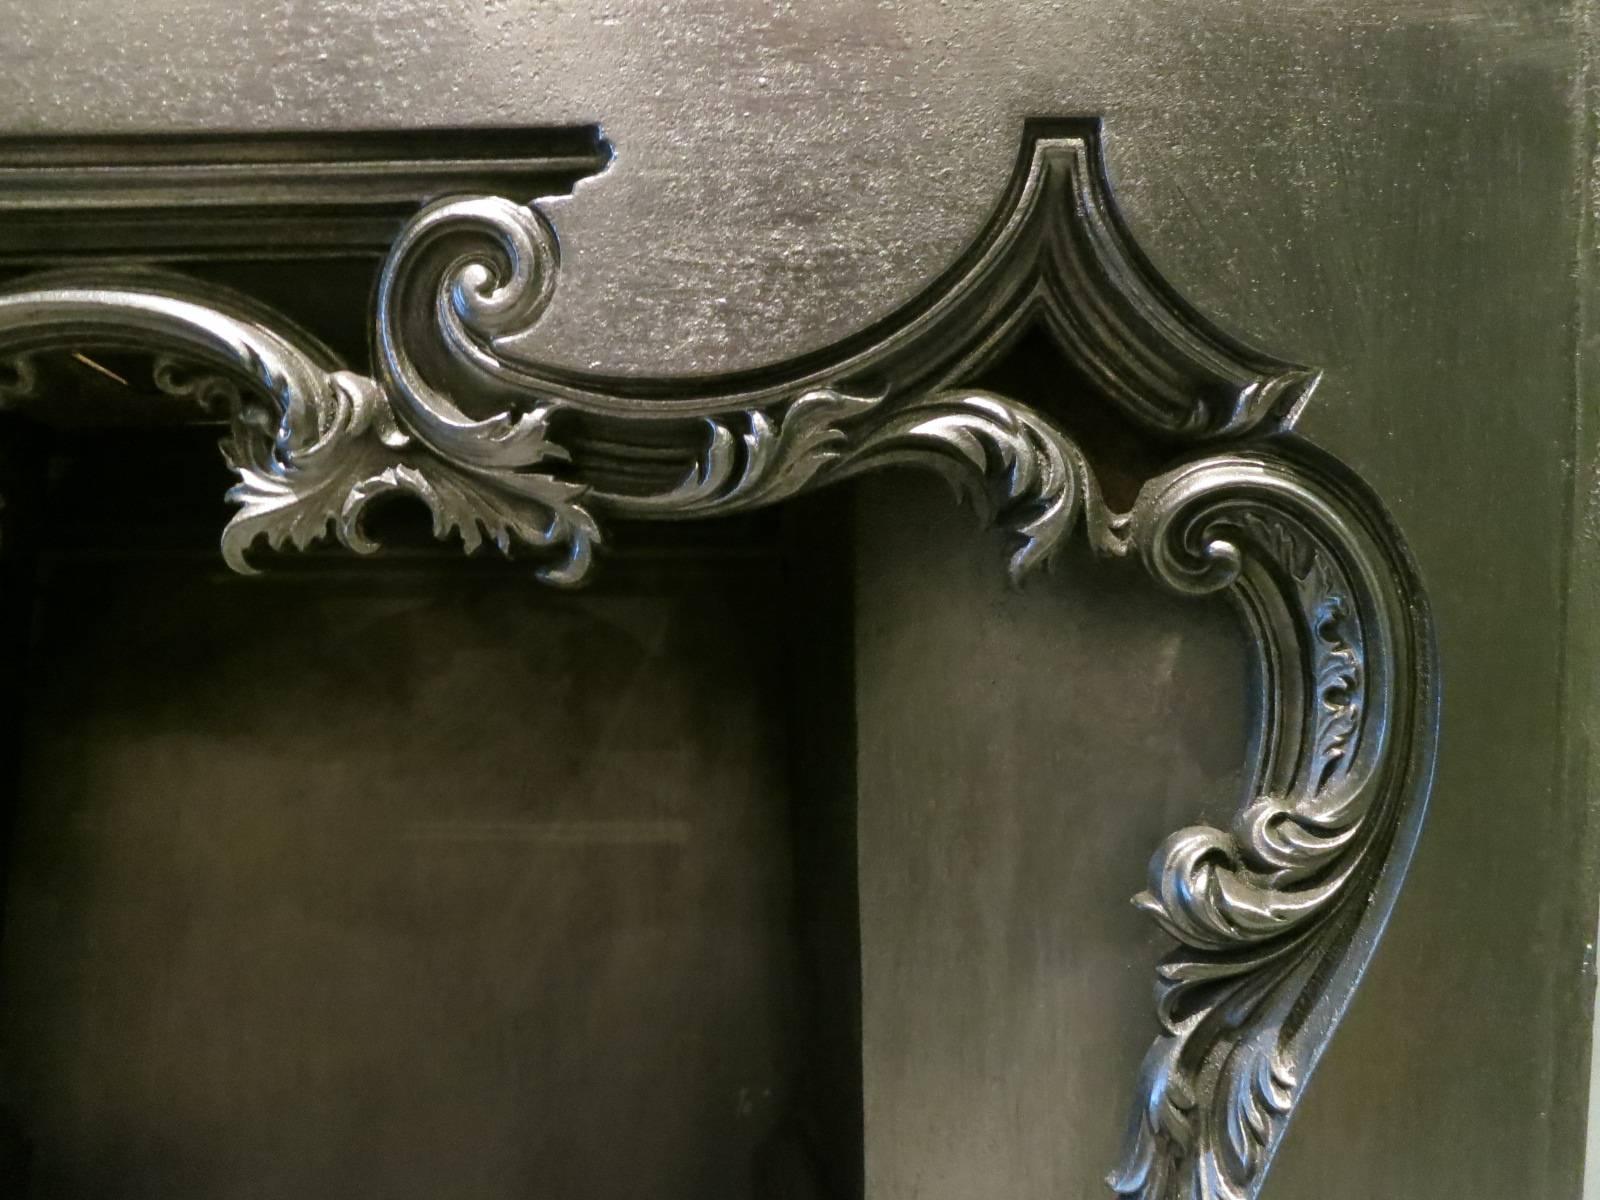 A large fireplace insert with decorative foliage castings framing the burning area, with plain inverted interior panels and back panel. The bowed front bars removable bars with conforming casting.